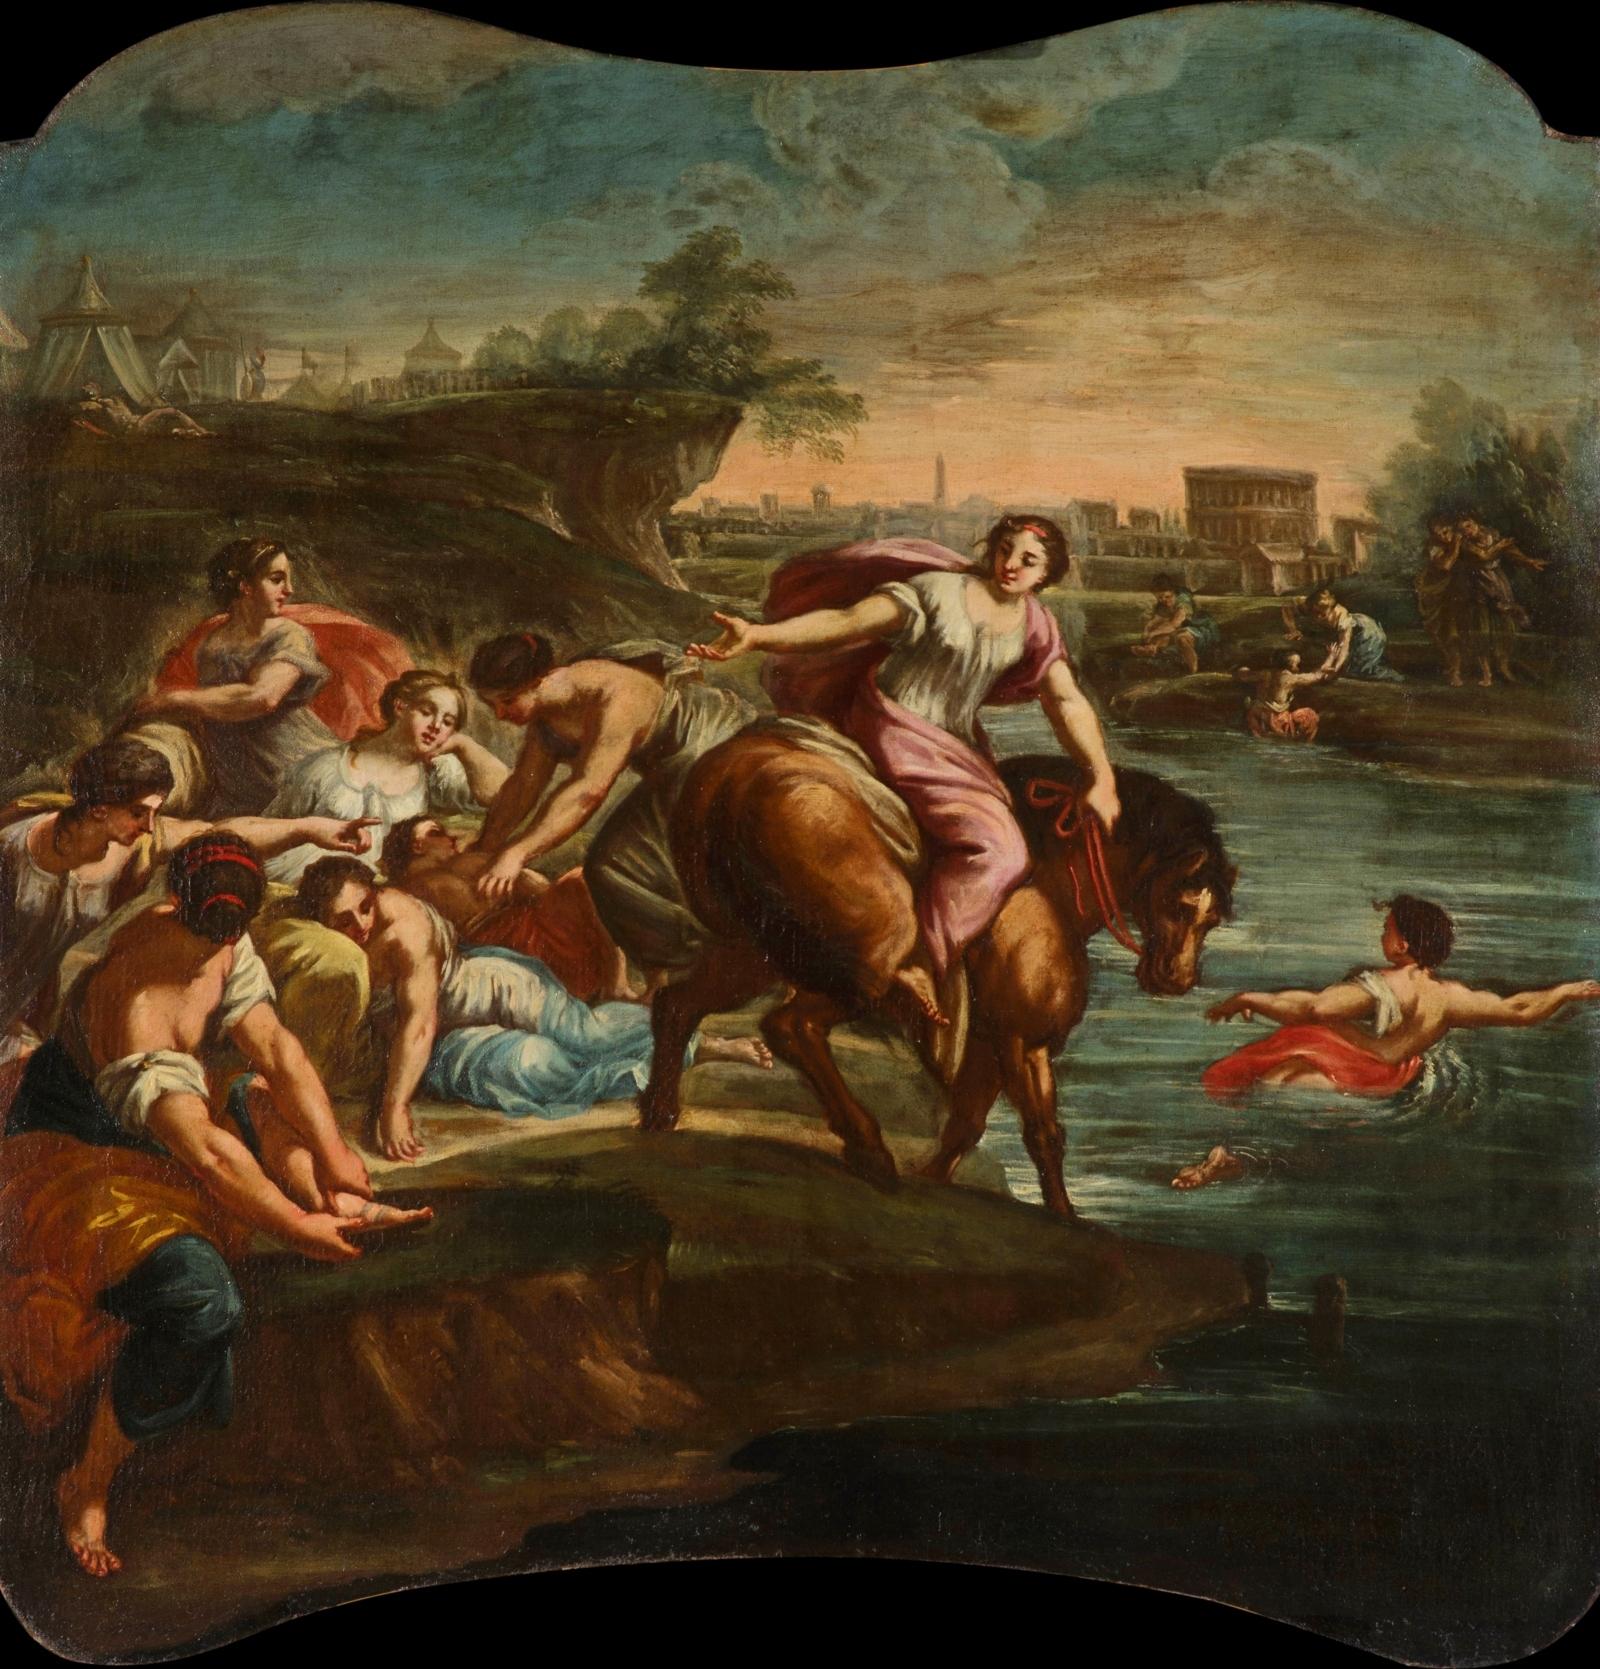 Hand-Painted 18th Century, Pair of Italian Paintings with Stories of Rome